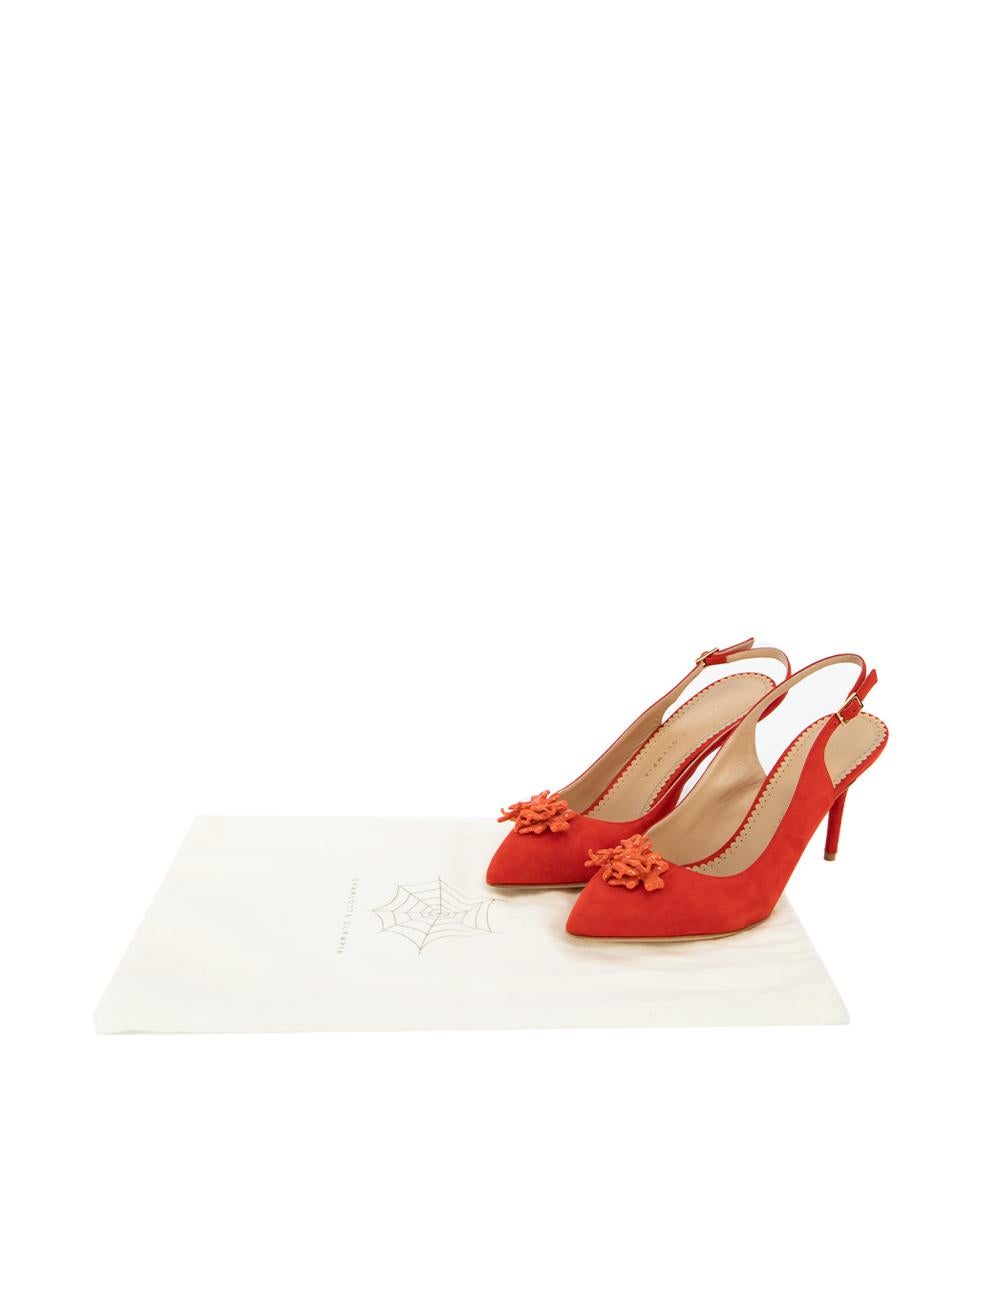 Pre-Loved Charlotte Olympia Women's Red Suede Slingback Heels with Coral Detail 2